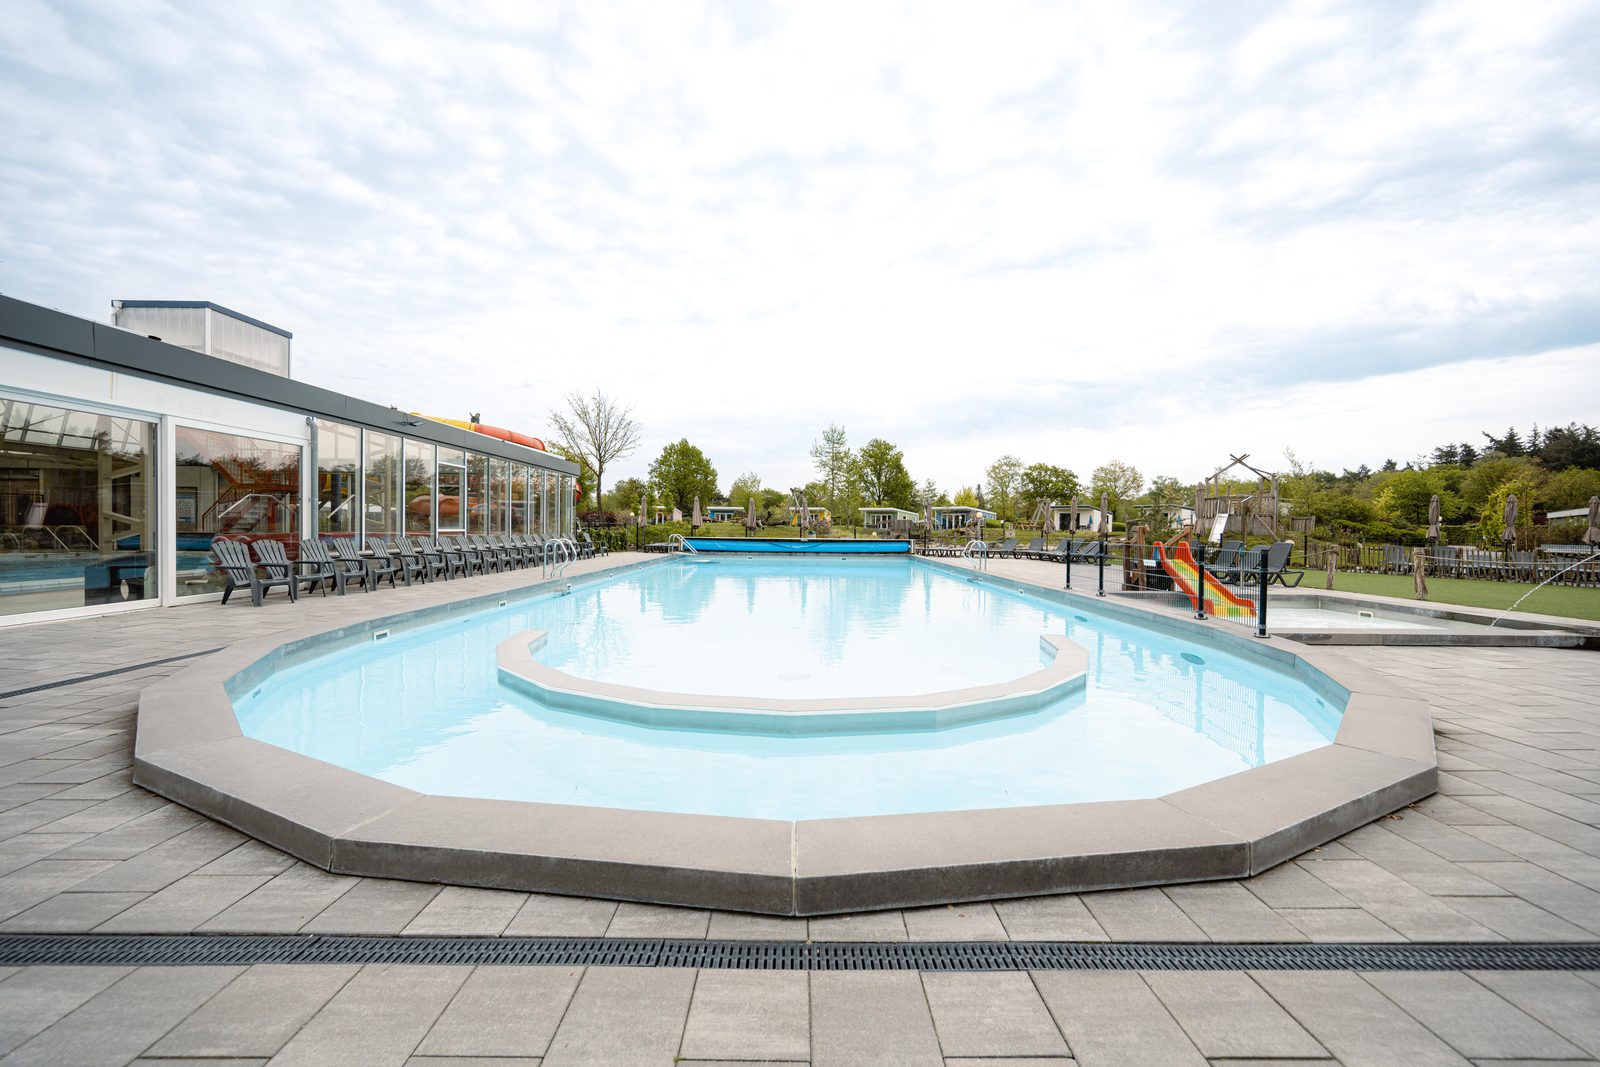 Large outdoor swimming pool